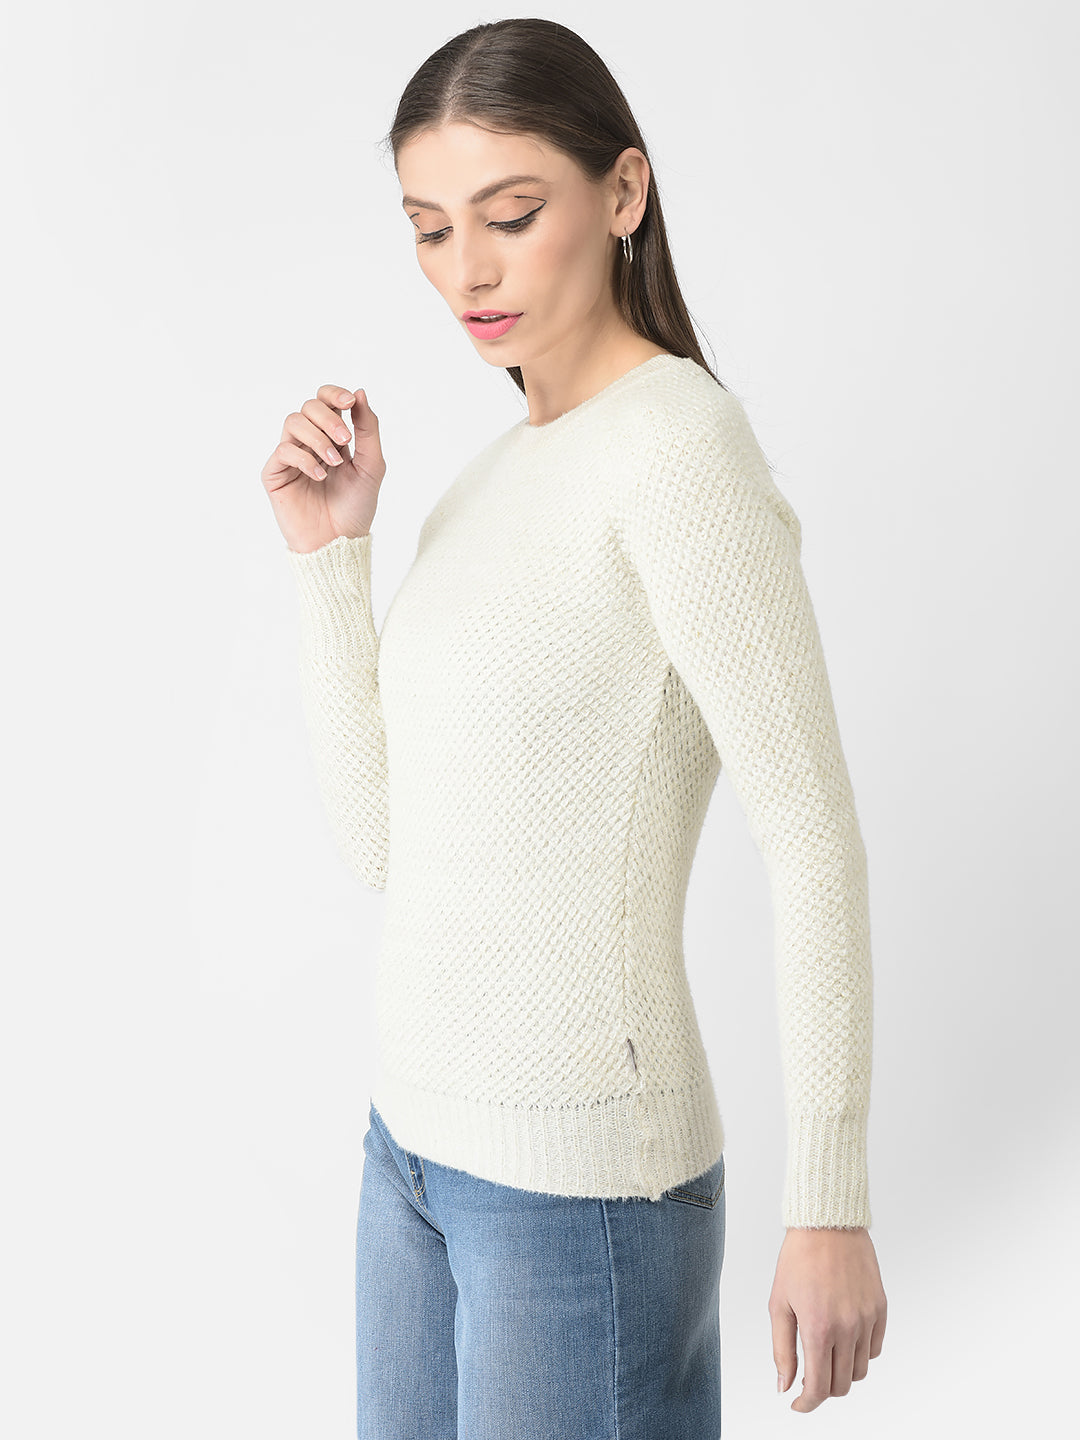  White Knitted Sweater 